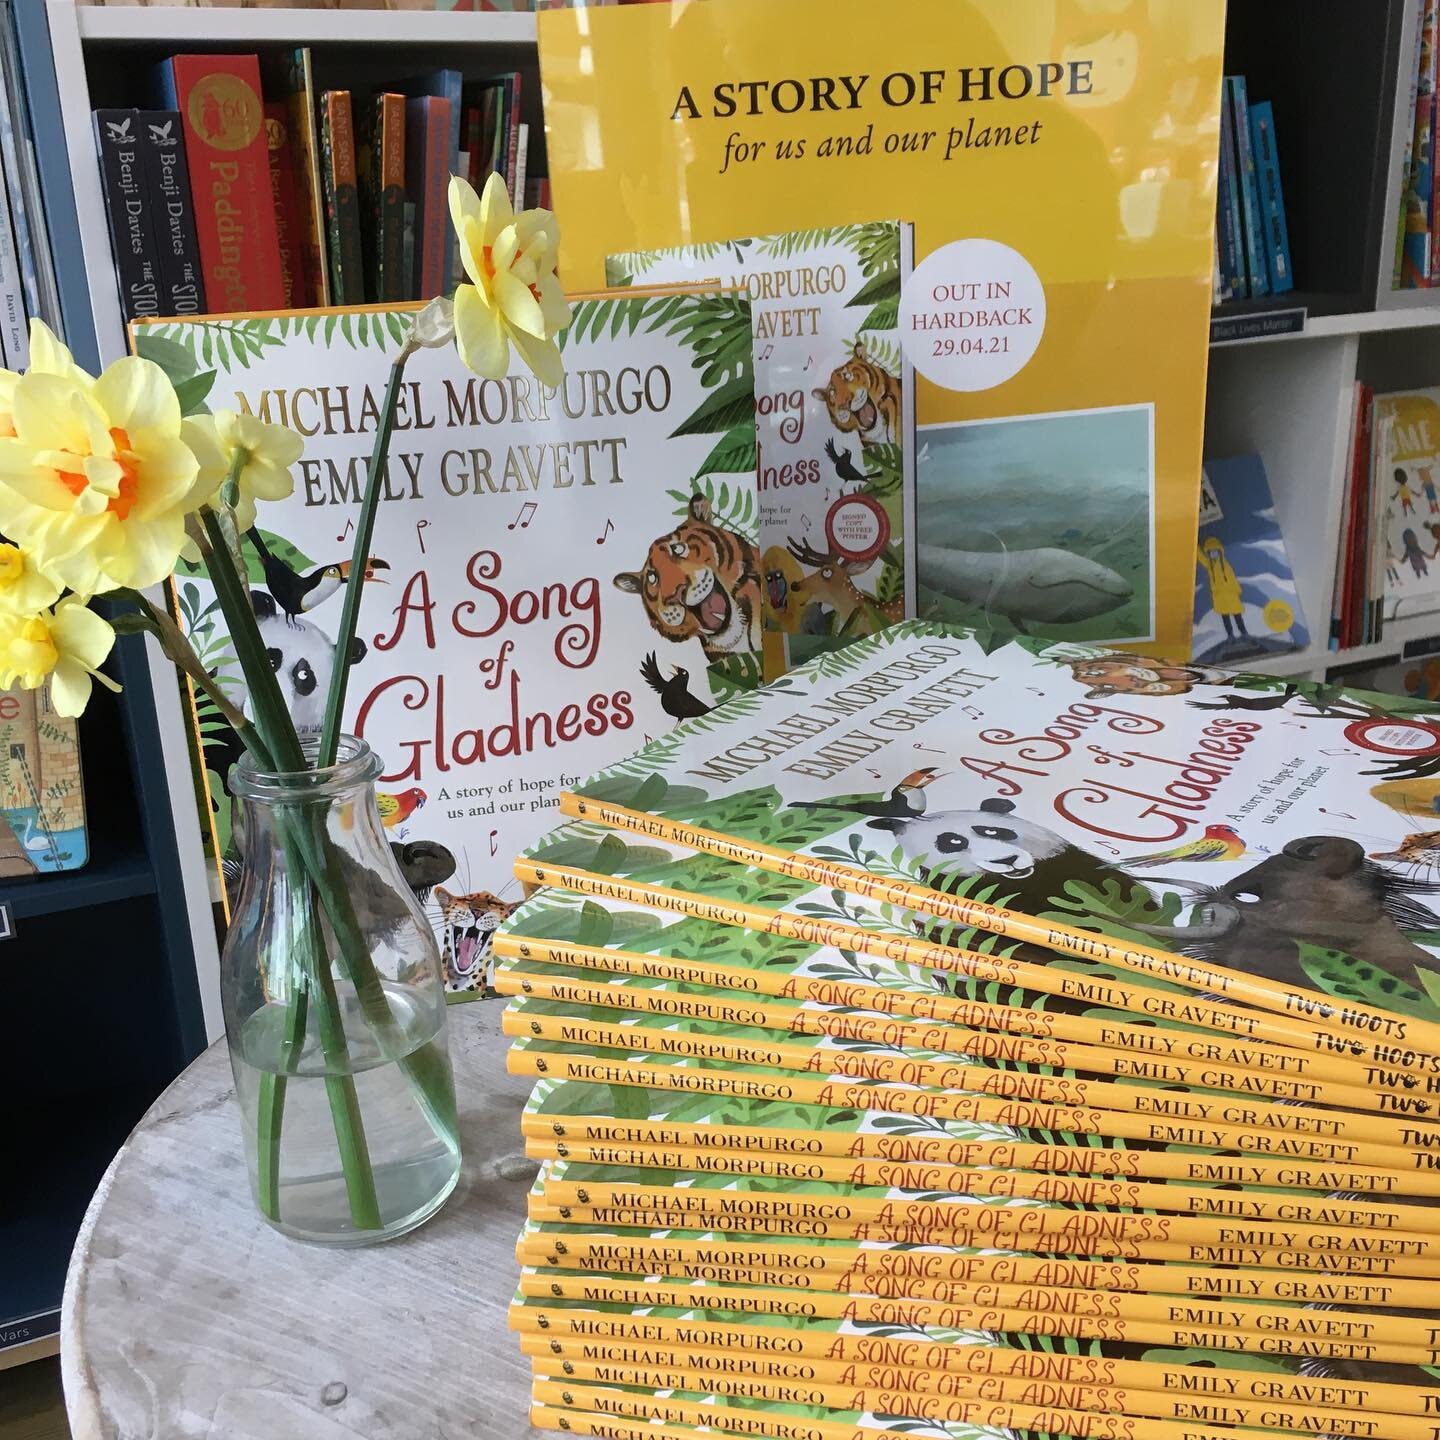 It&rsquo;s hailing outside, but this pile of beauties just arrived to make us smile 😁.
It&rsquo;s a celebration (we all need one) of our wonderful planet and it&rsquo;s an absolute joy! It was blackbird&rsquo;s idea apparently. Thank you blackbird! 